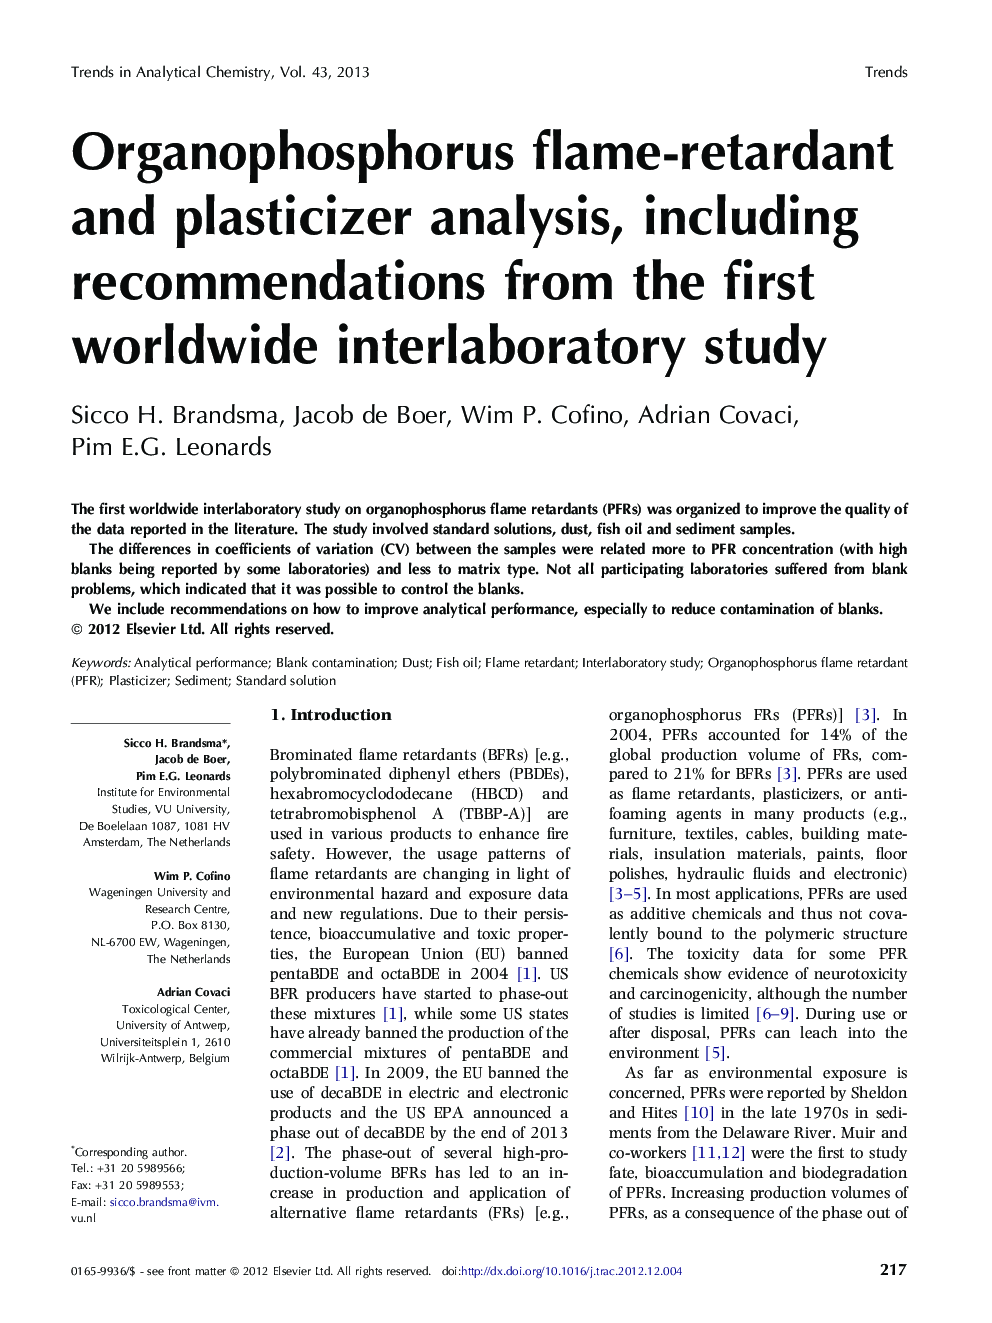 Organophosphorus flame-retardant and plasticizer analysis, including recommendations from the first worldwide interlaboratory study